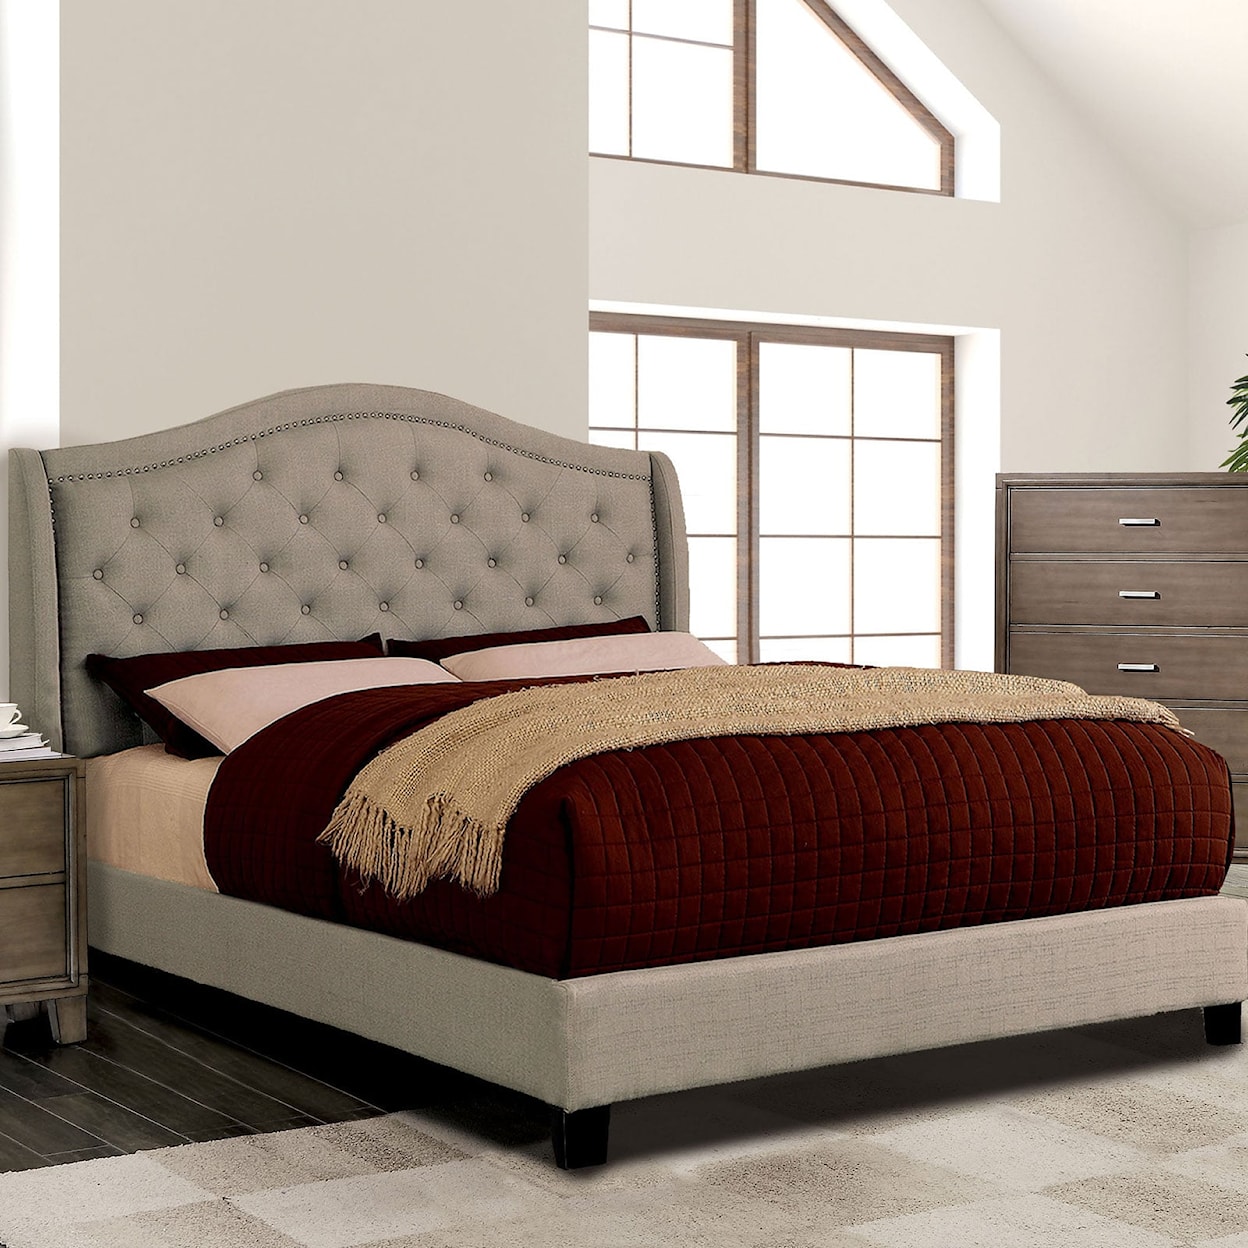 Furniture of America Carly Queen Bed, Warm Gray